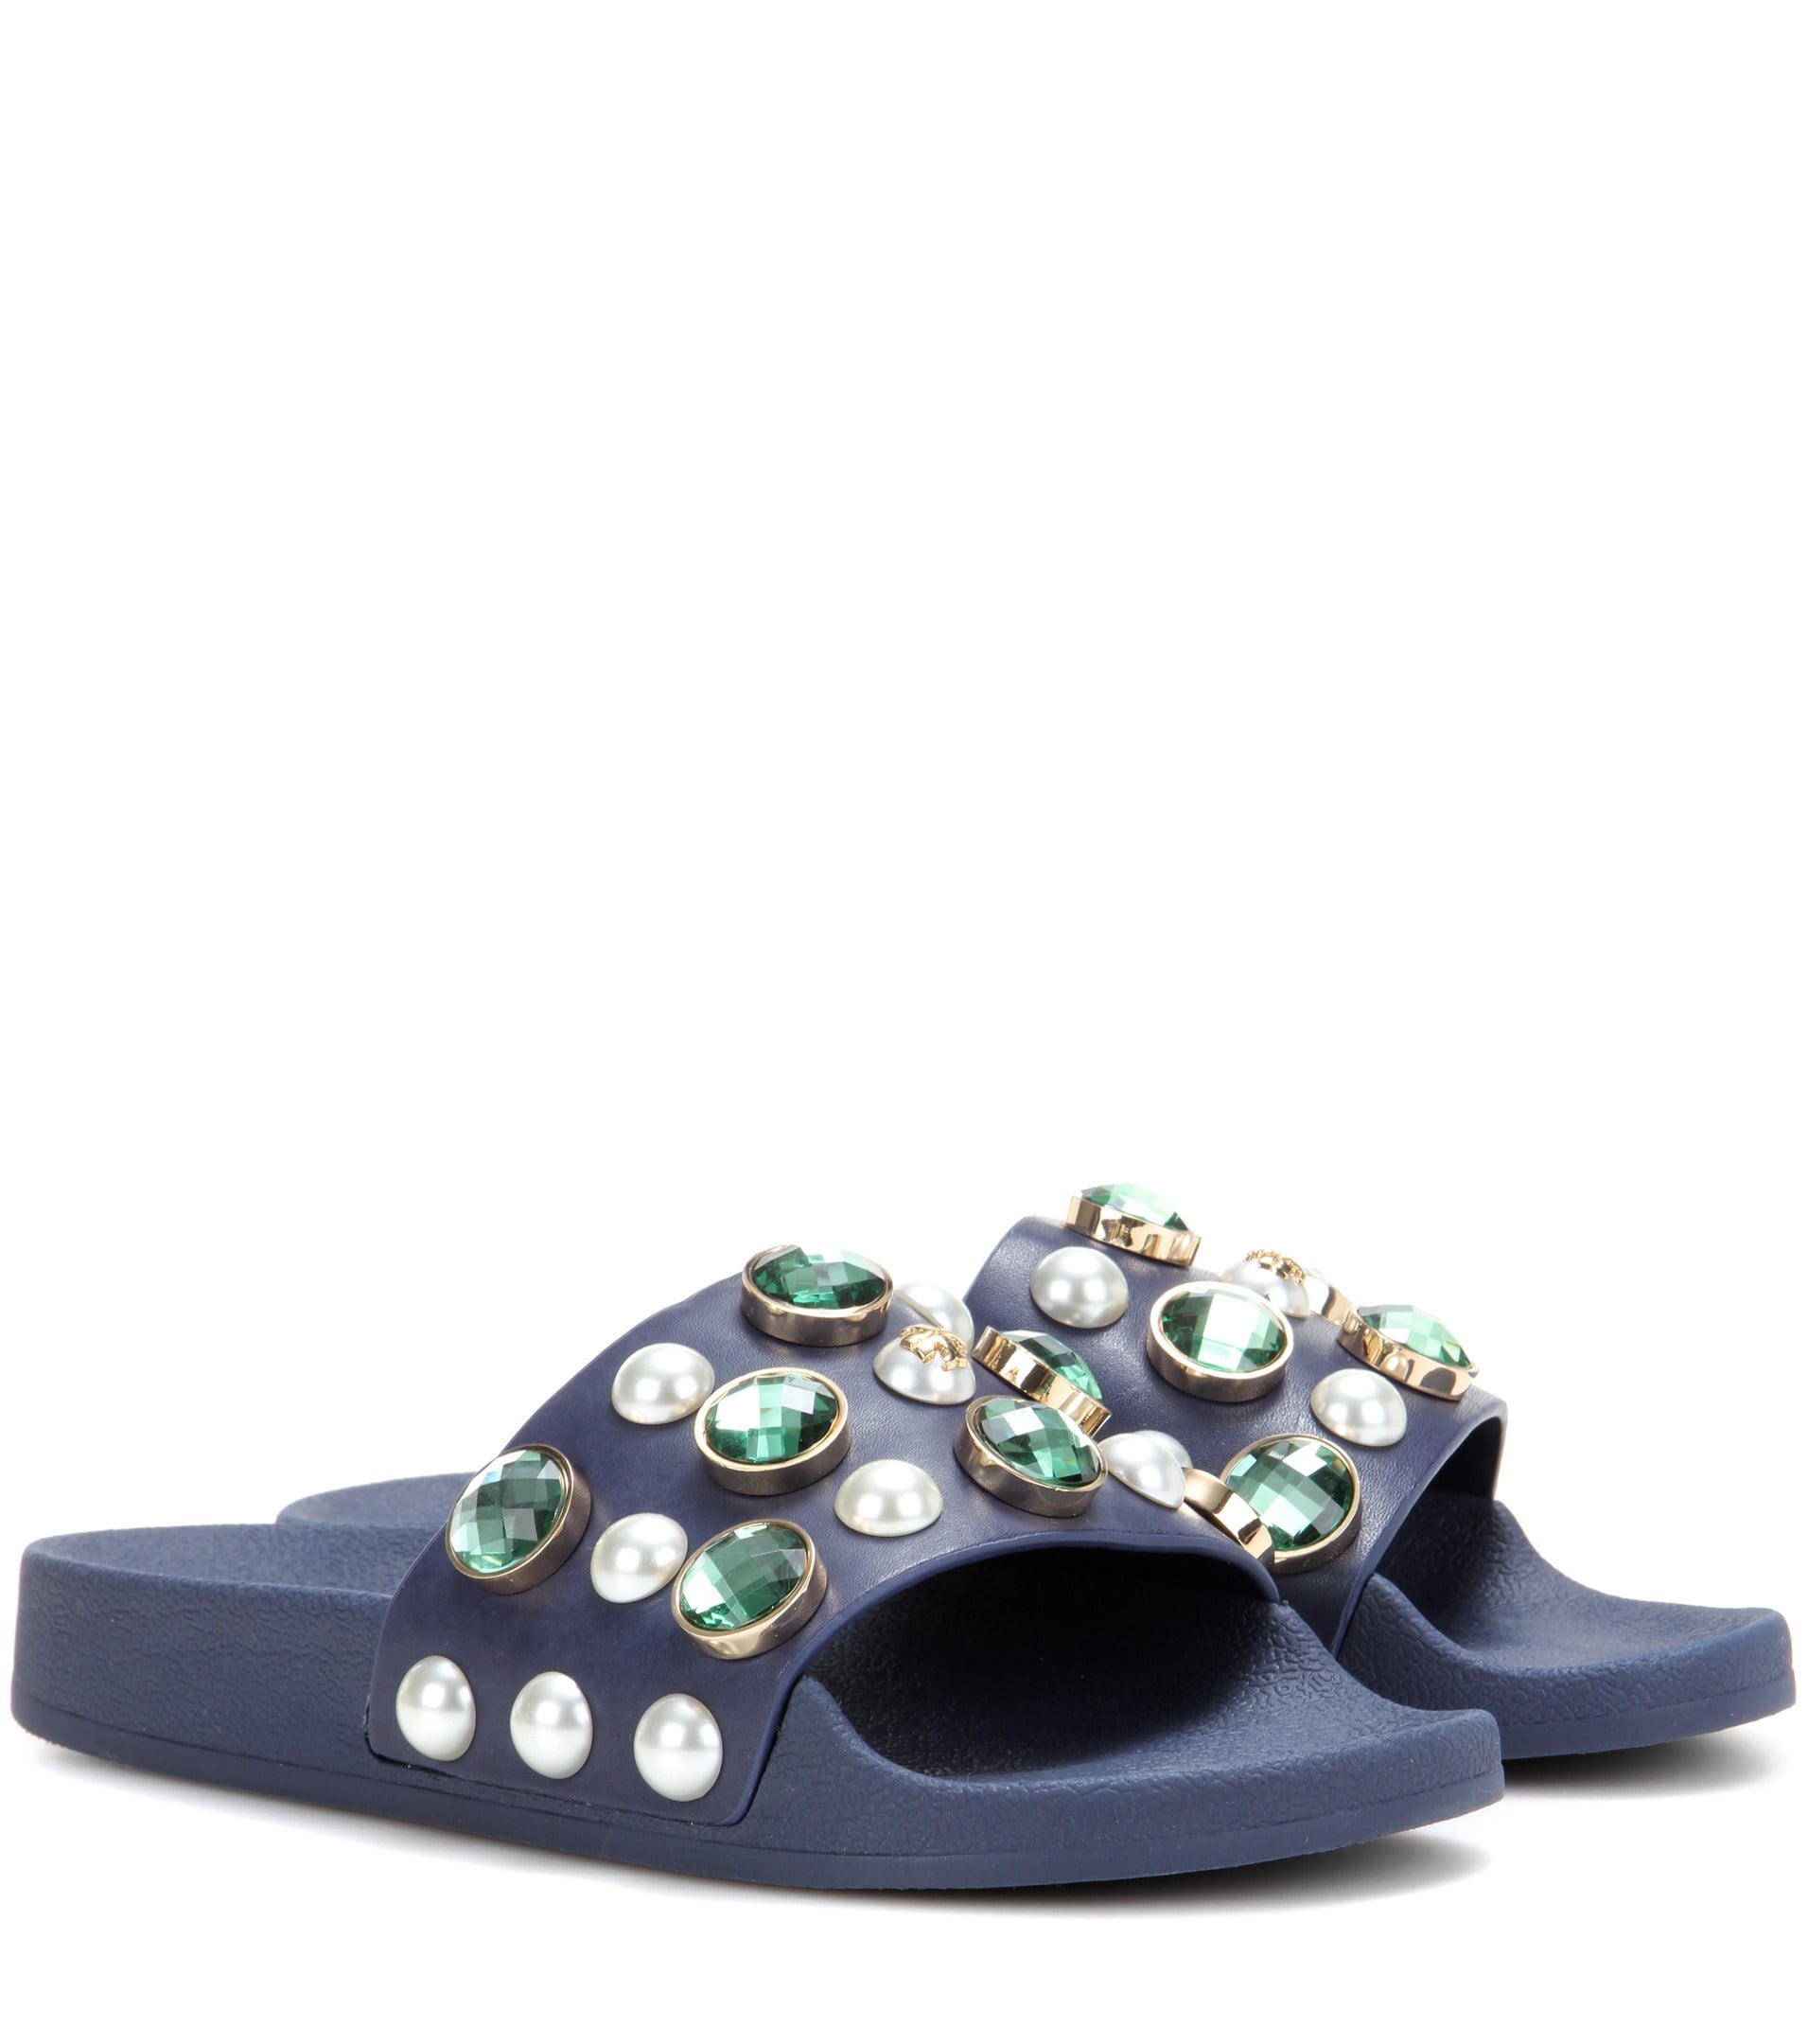 Tory Burch Vail Embellished Leather Slide Sandals | We Popped the Question:  Are Birkenstocks Still in Style? | POPSUGAR Fashion Photo 13